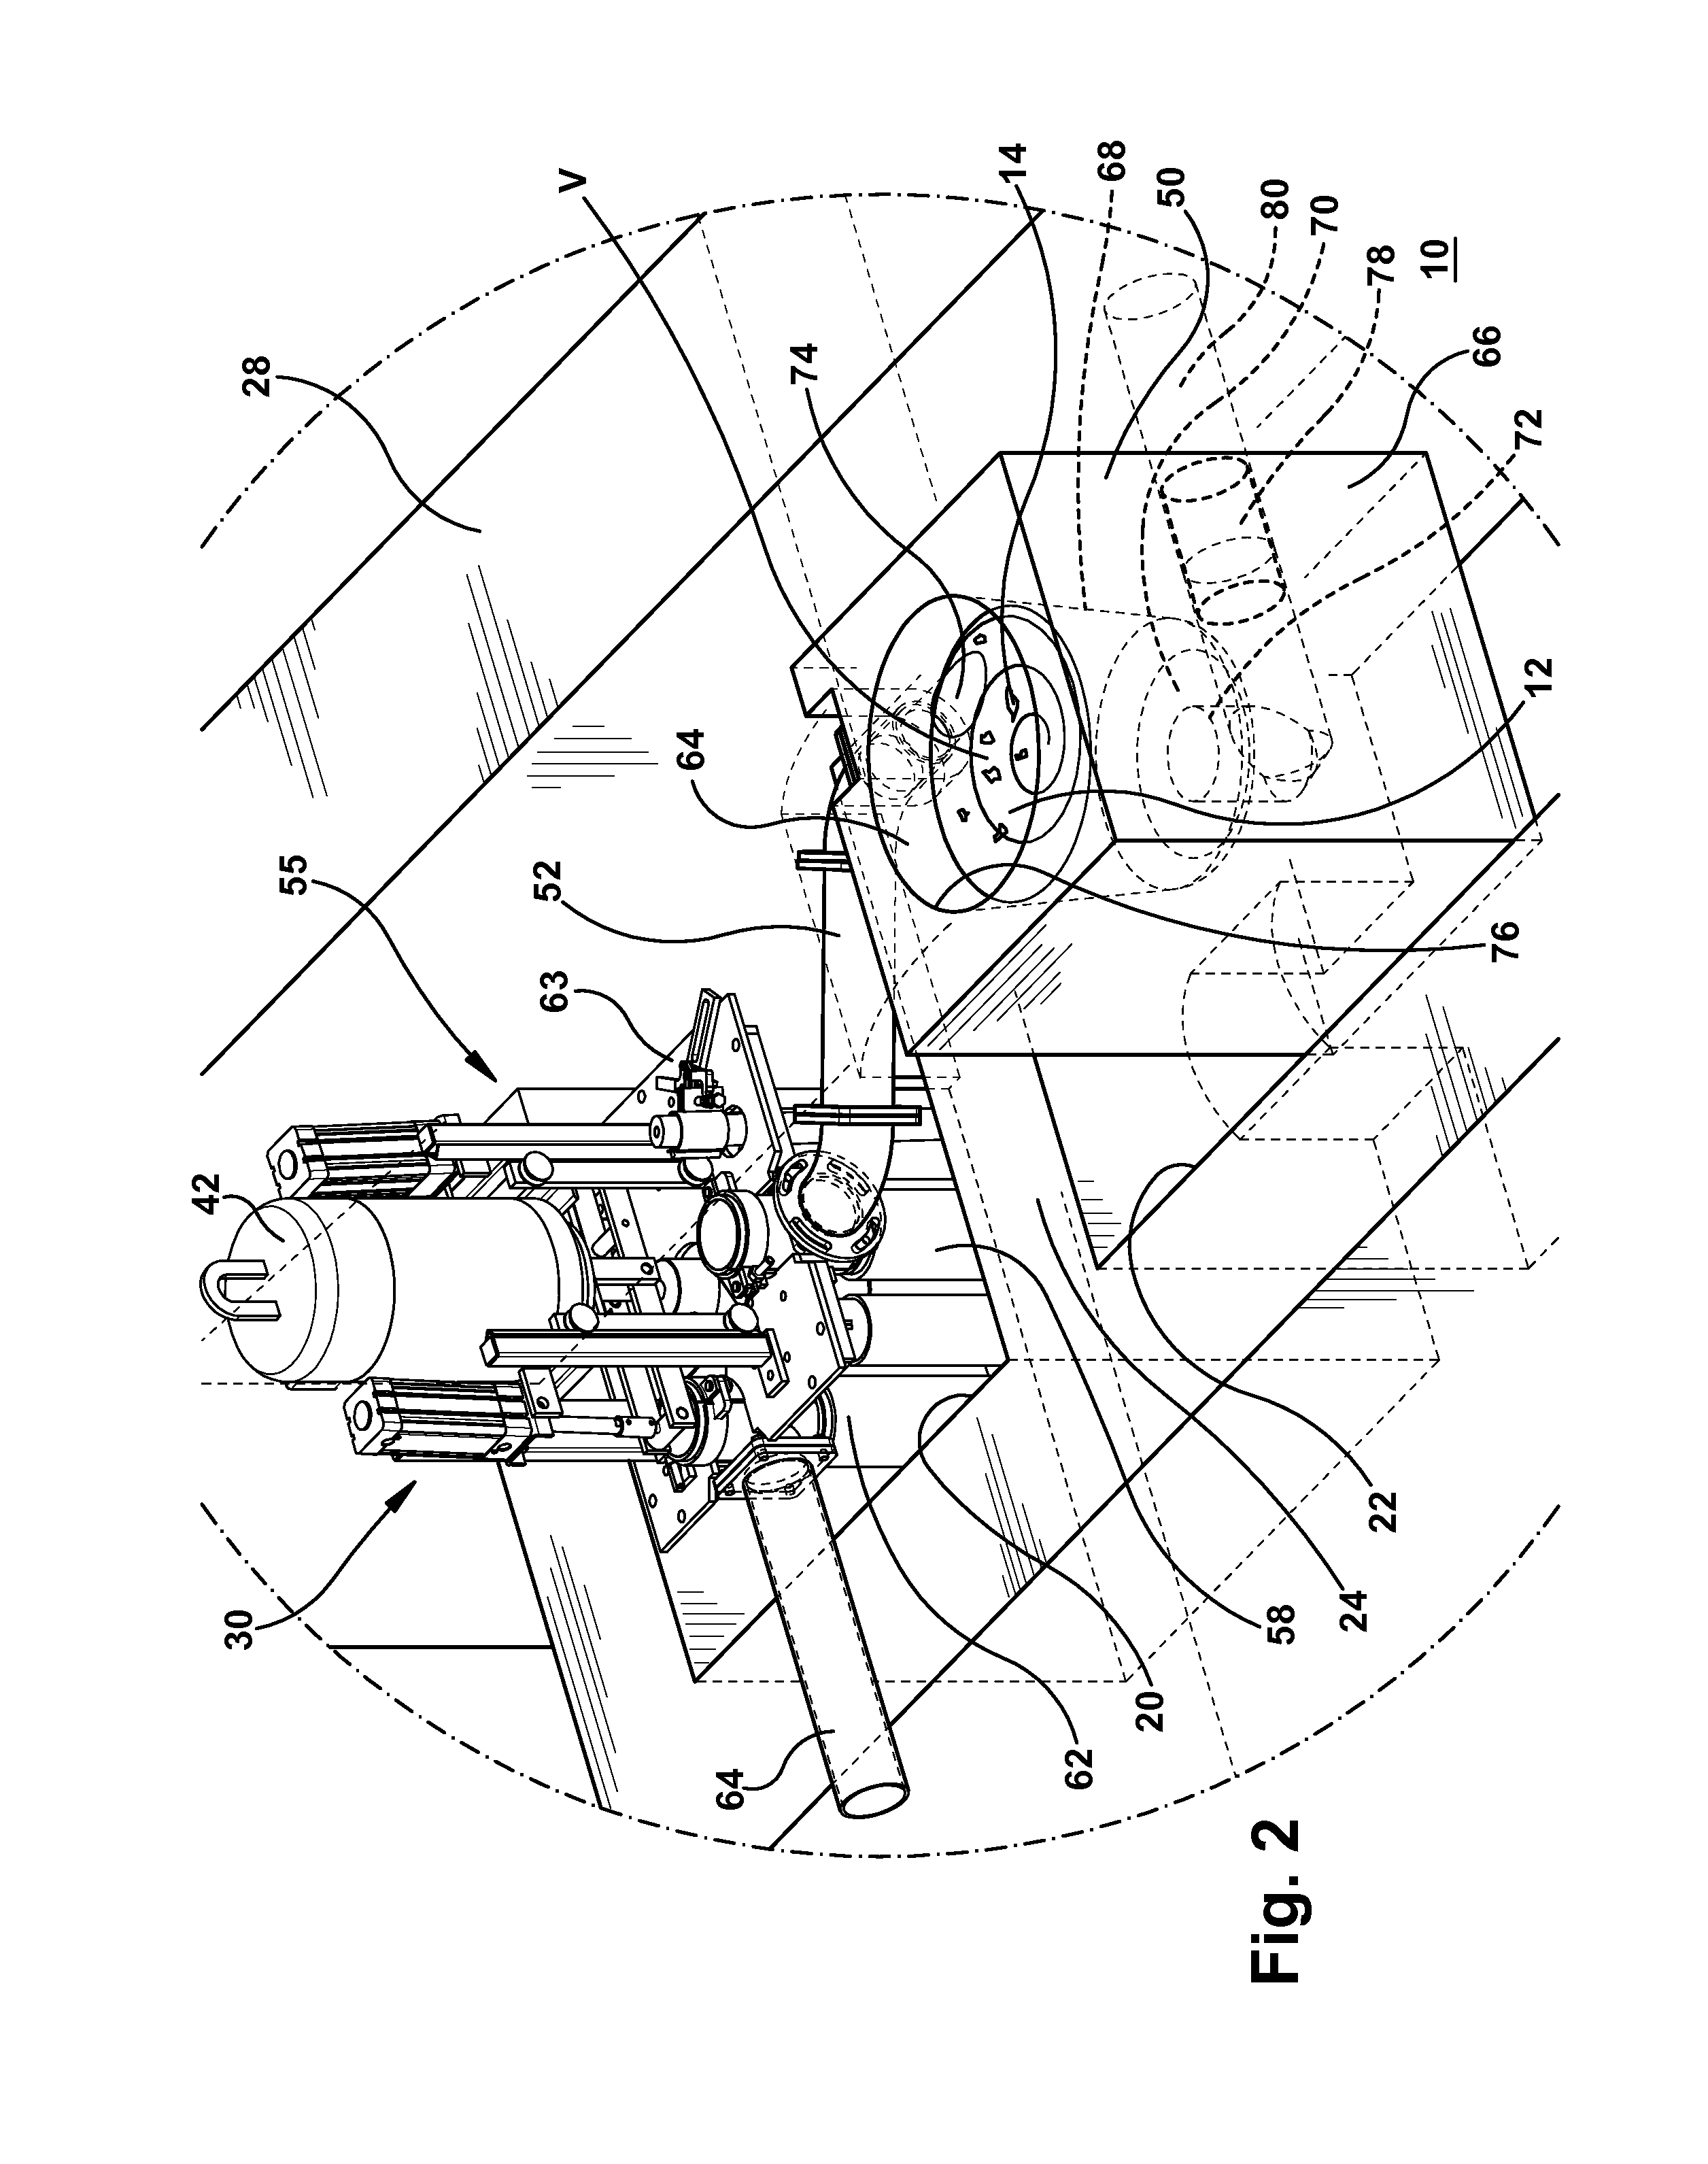 System and method for pumping molten metal and melting metal scrap